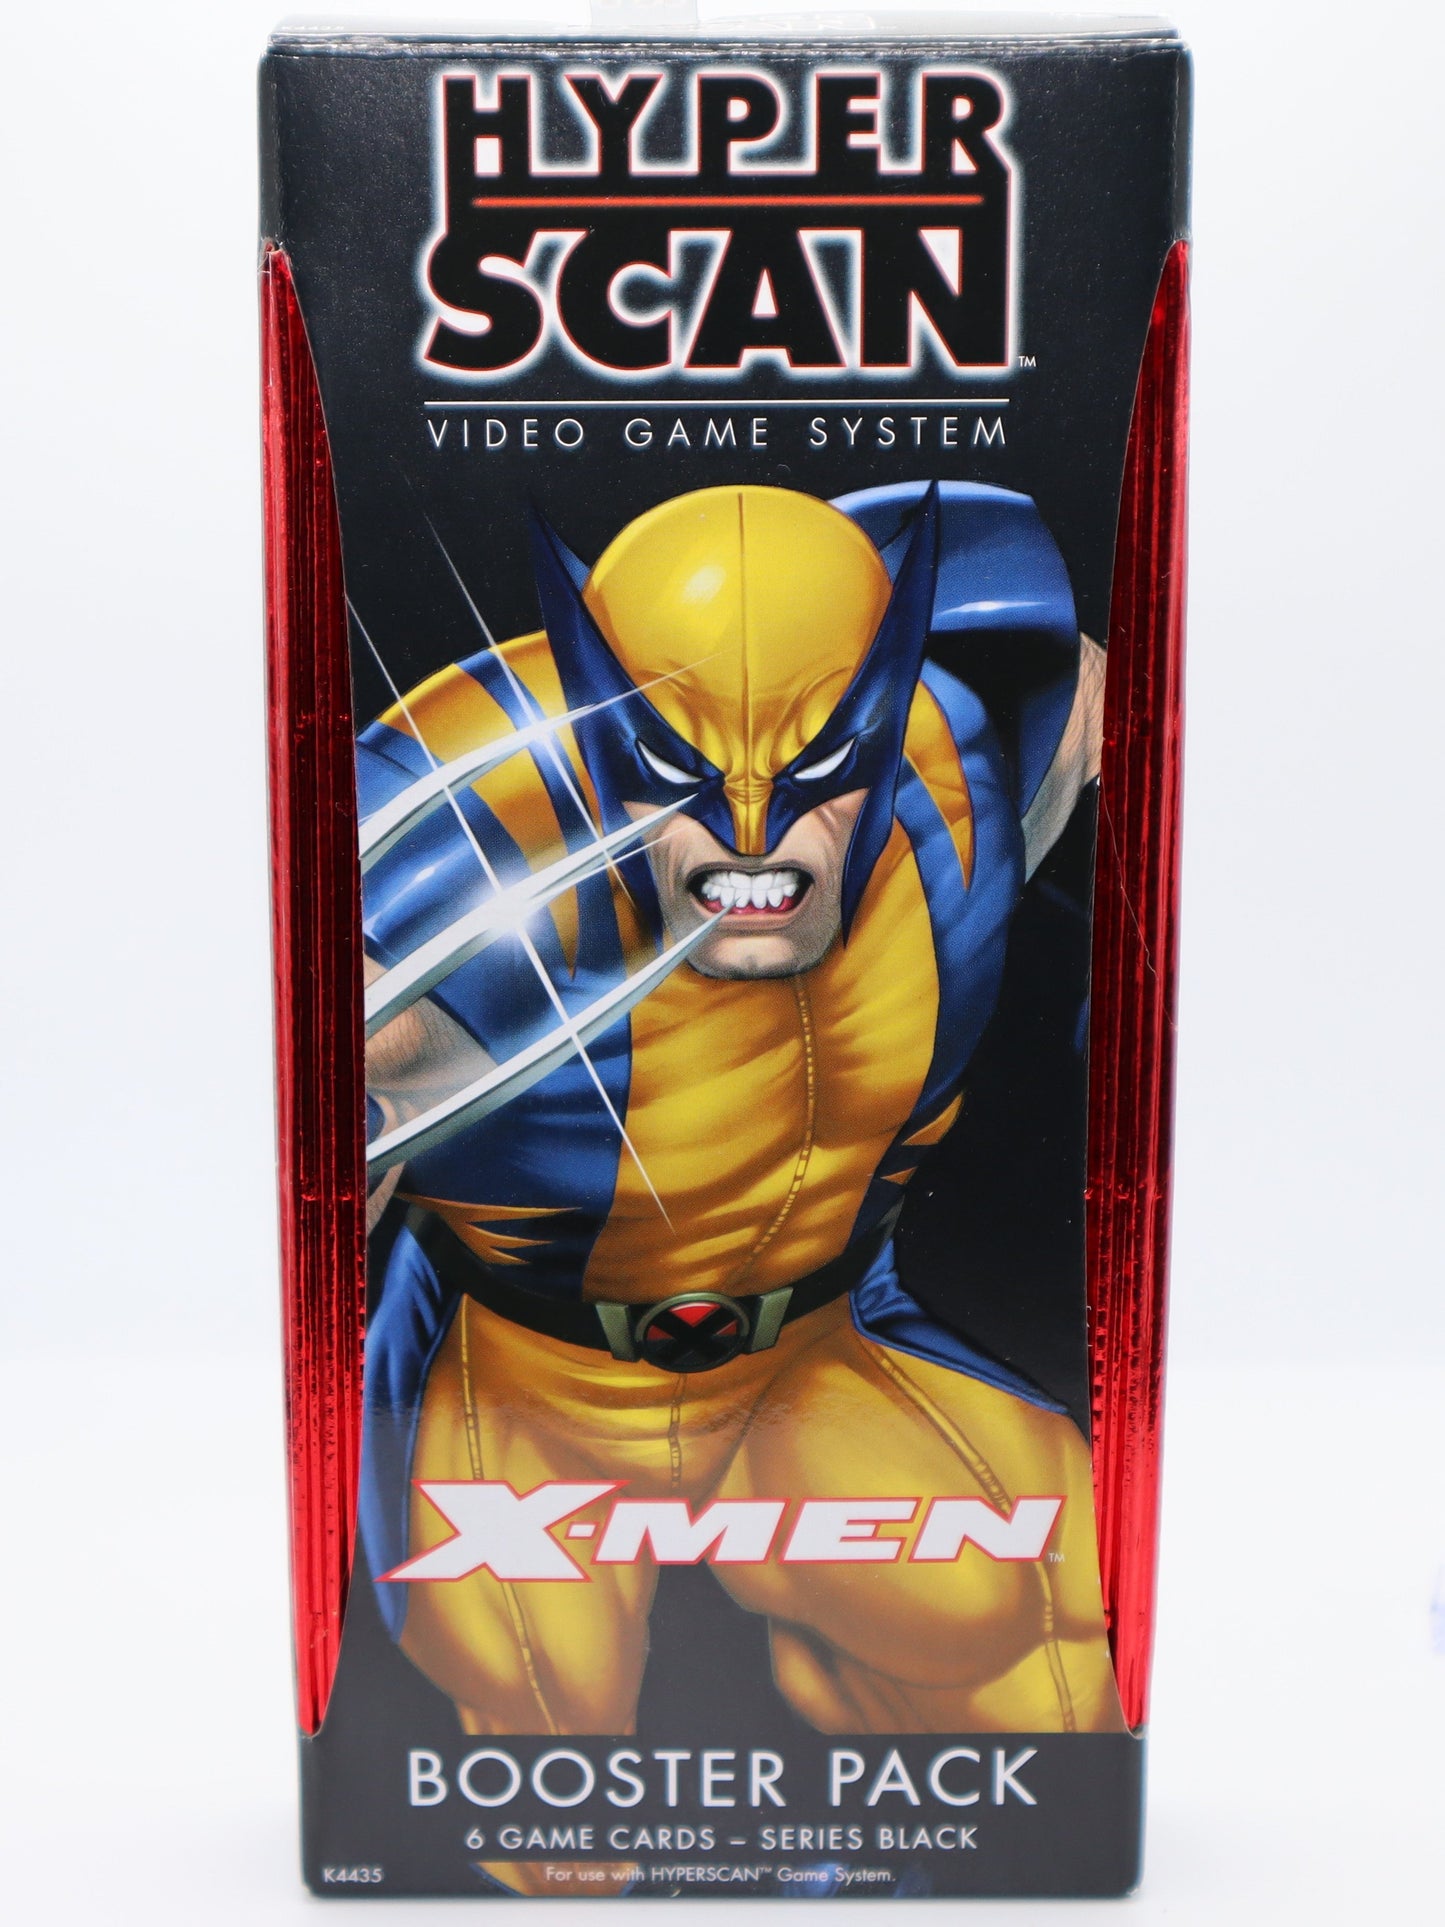 2006 Hyper Scan X - Men Series Black Booster Pack - Collectibles